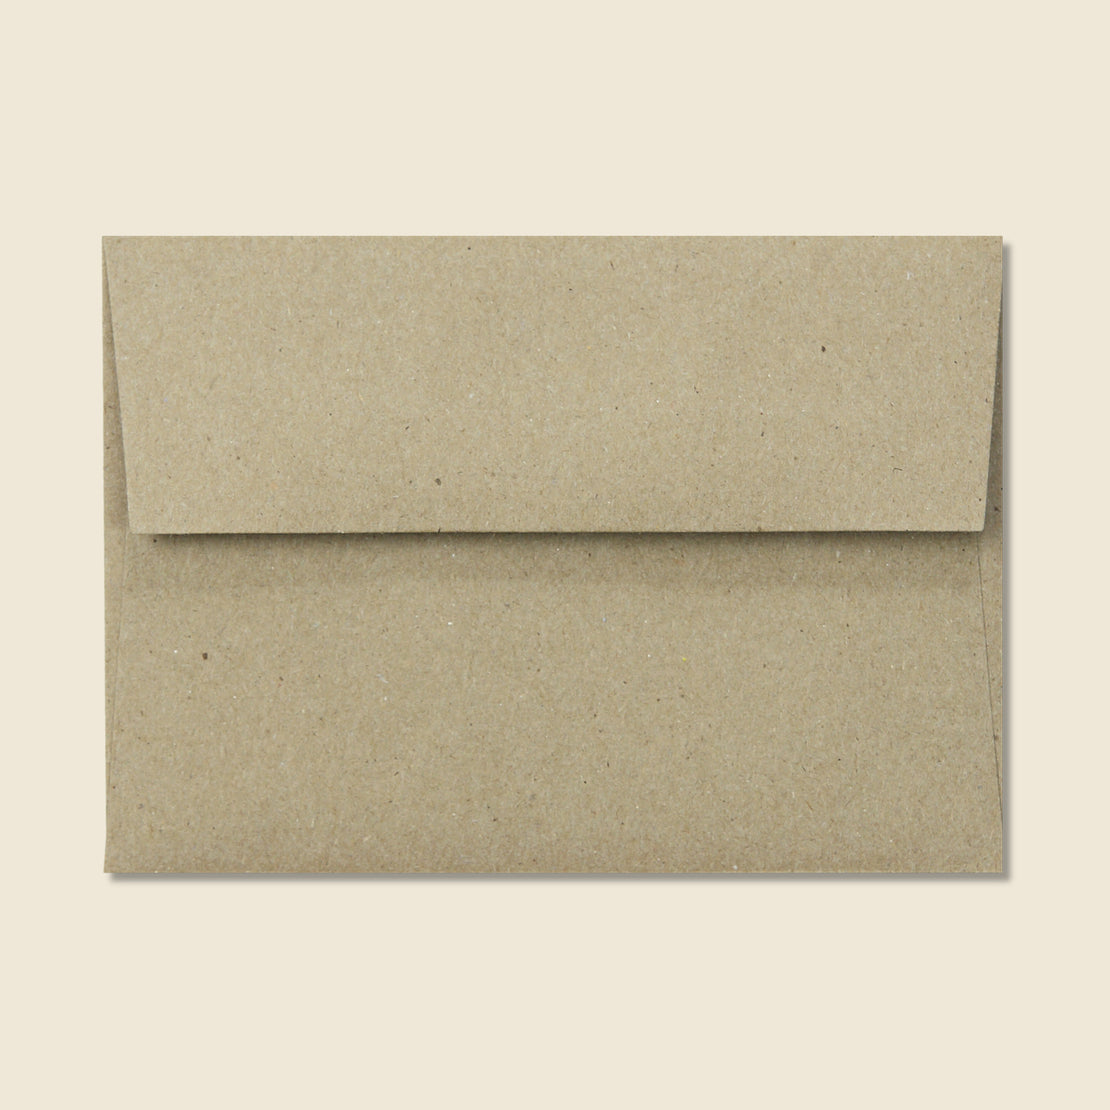 Boatload of Thanks Card - Paper Goods - STAG Provisions - Gift - Stationery